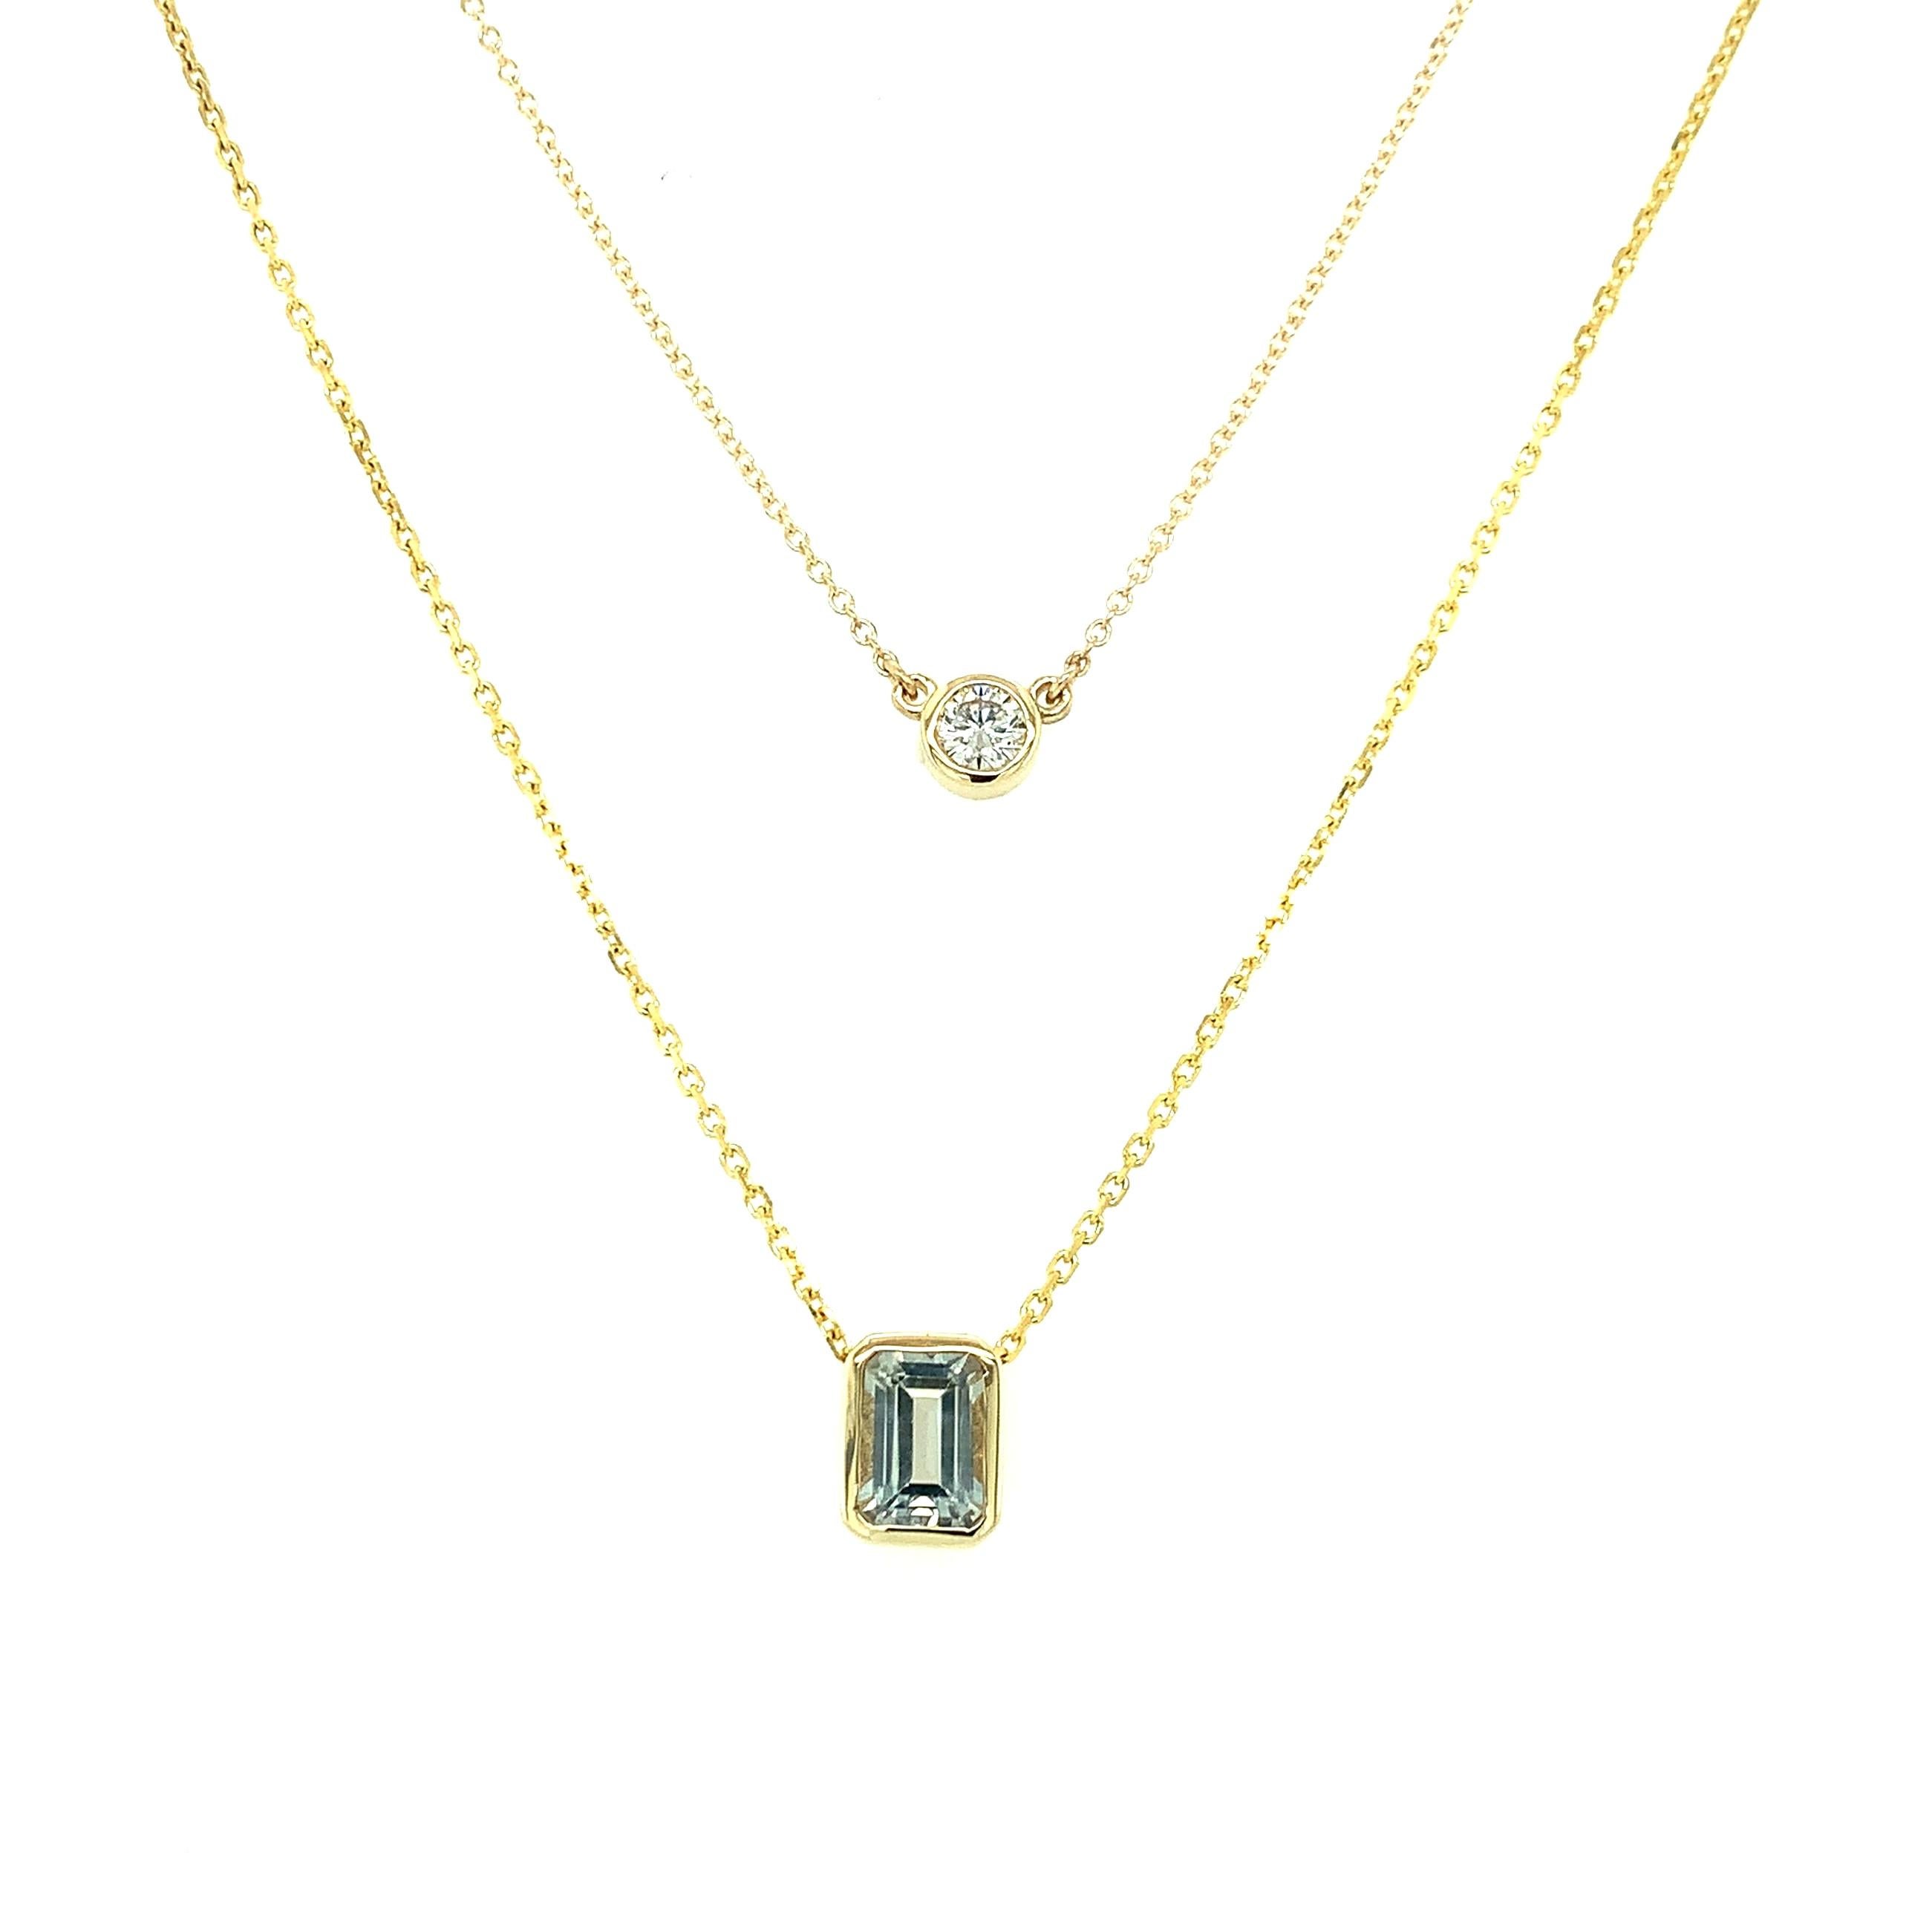 1.15 Carat Emerald Cut Topaz Pendant Yellow Gold Bezel Necklace with Chain 1